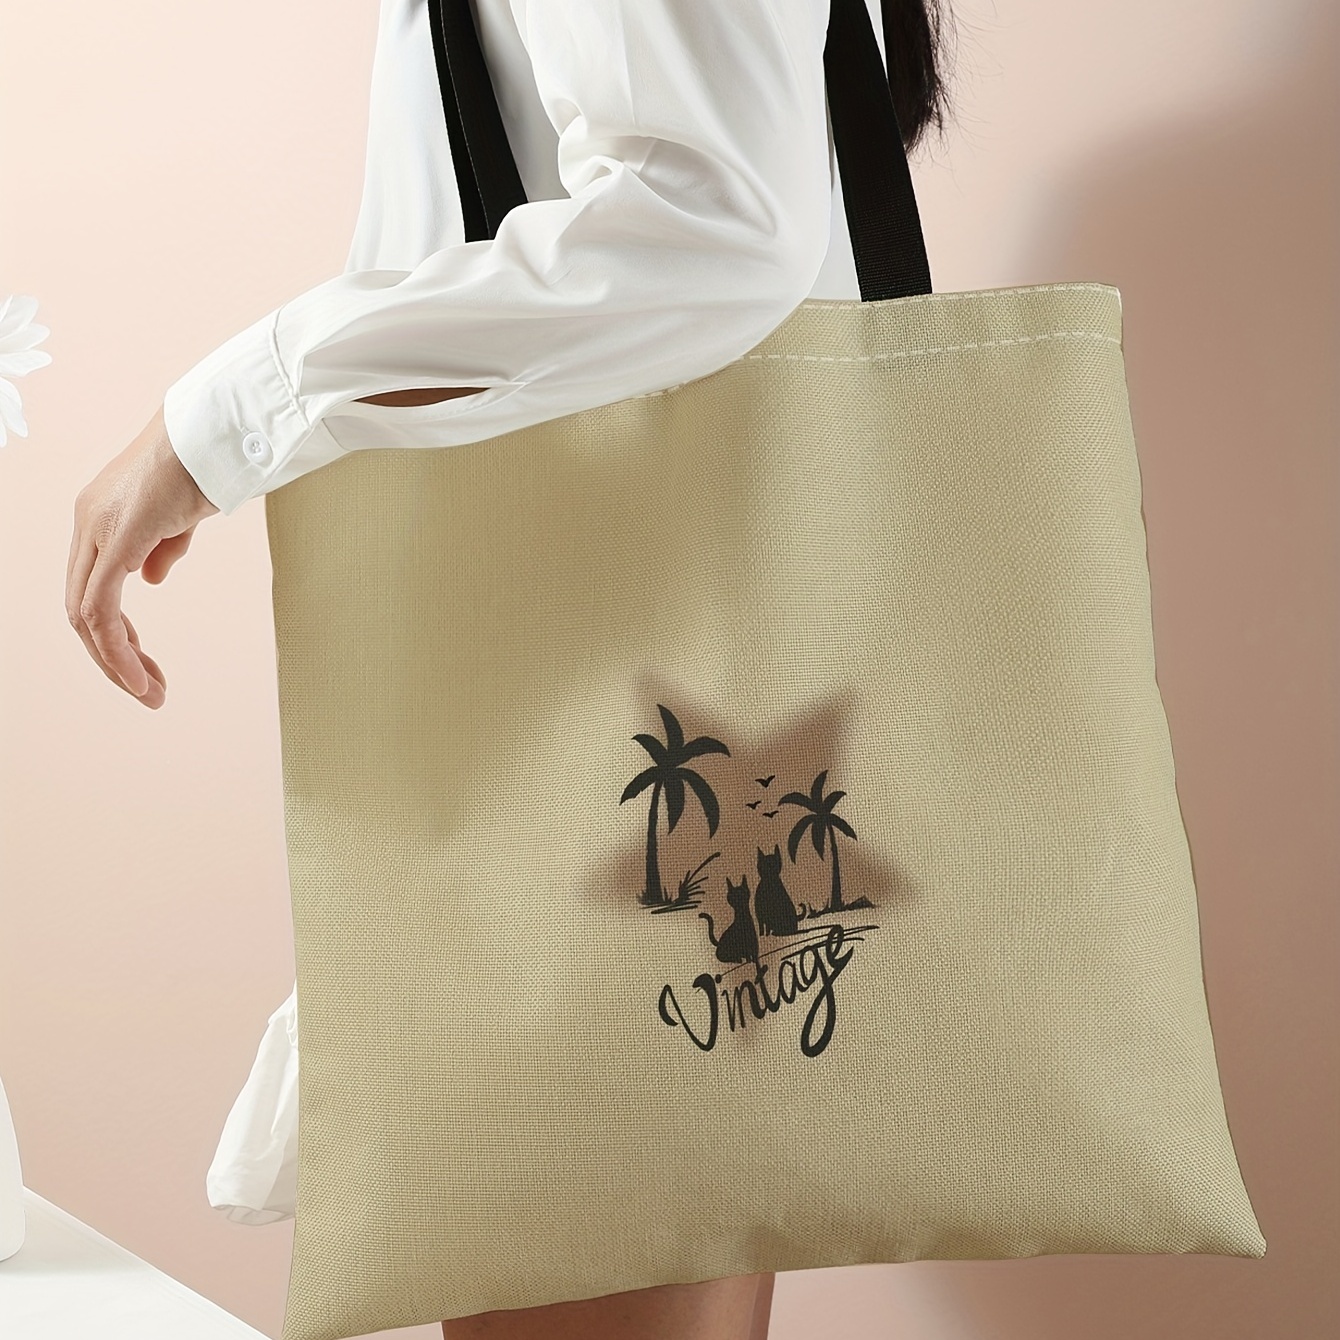 Hand Painted Tote Bag Large Canvas Beach Bag Shopping Bag With 